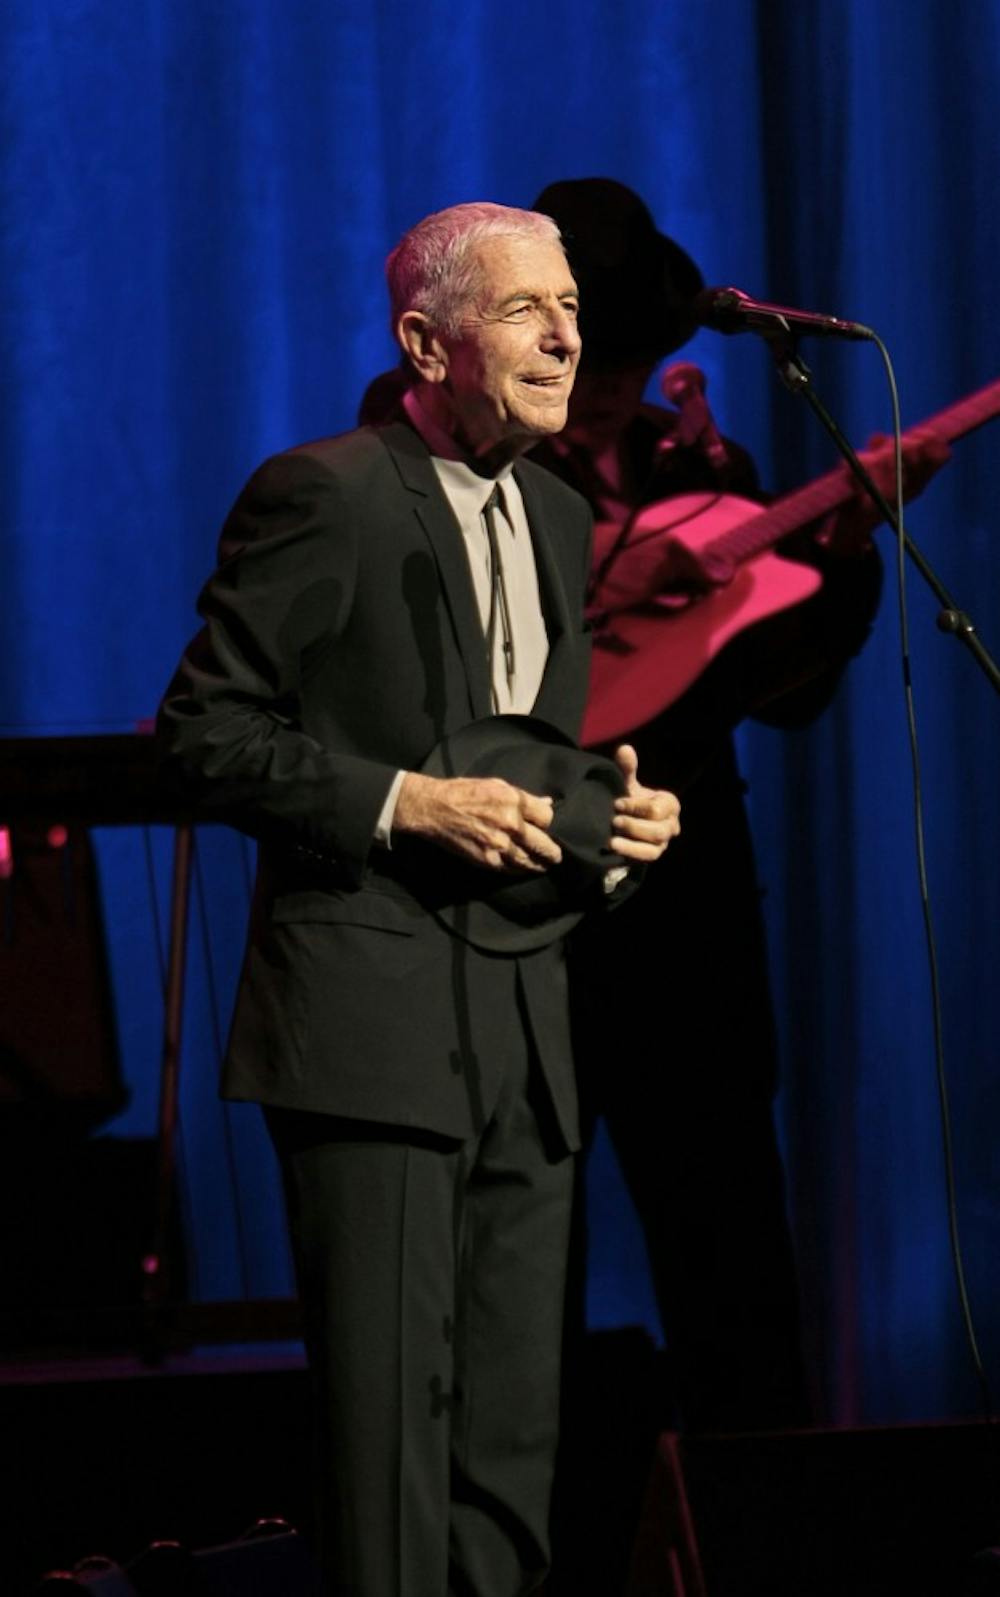 Leonard Cohen performs at the Beacon Theater in New York on February 19, 2009. Cohen, a singer-songwriter whose literary sensibility and elegant dissections of desire made him one of popular music's most influential and admired figures, died on Thursday, Nov. 10, 2016, at 82. (Carolyn Cole/Los Angeles Times/TNS)